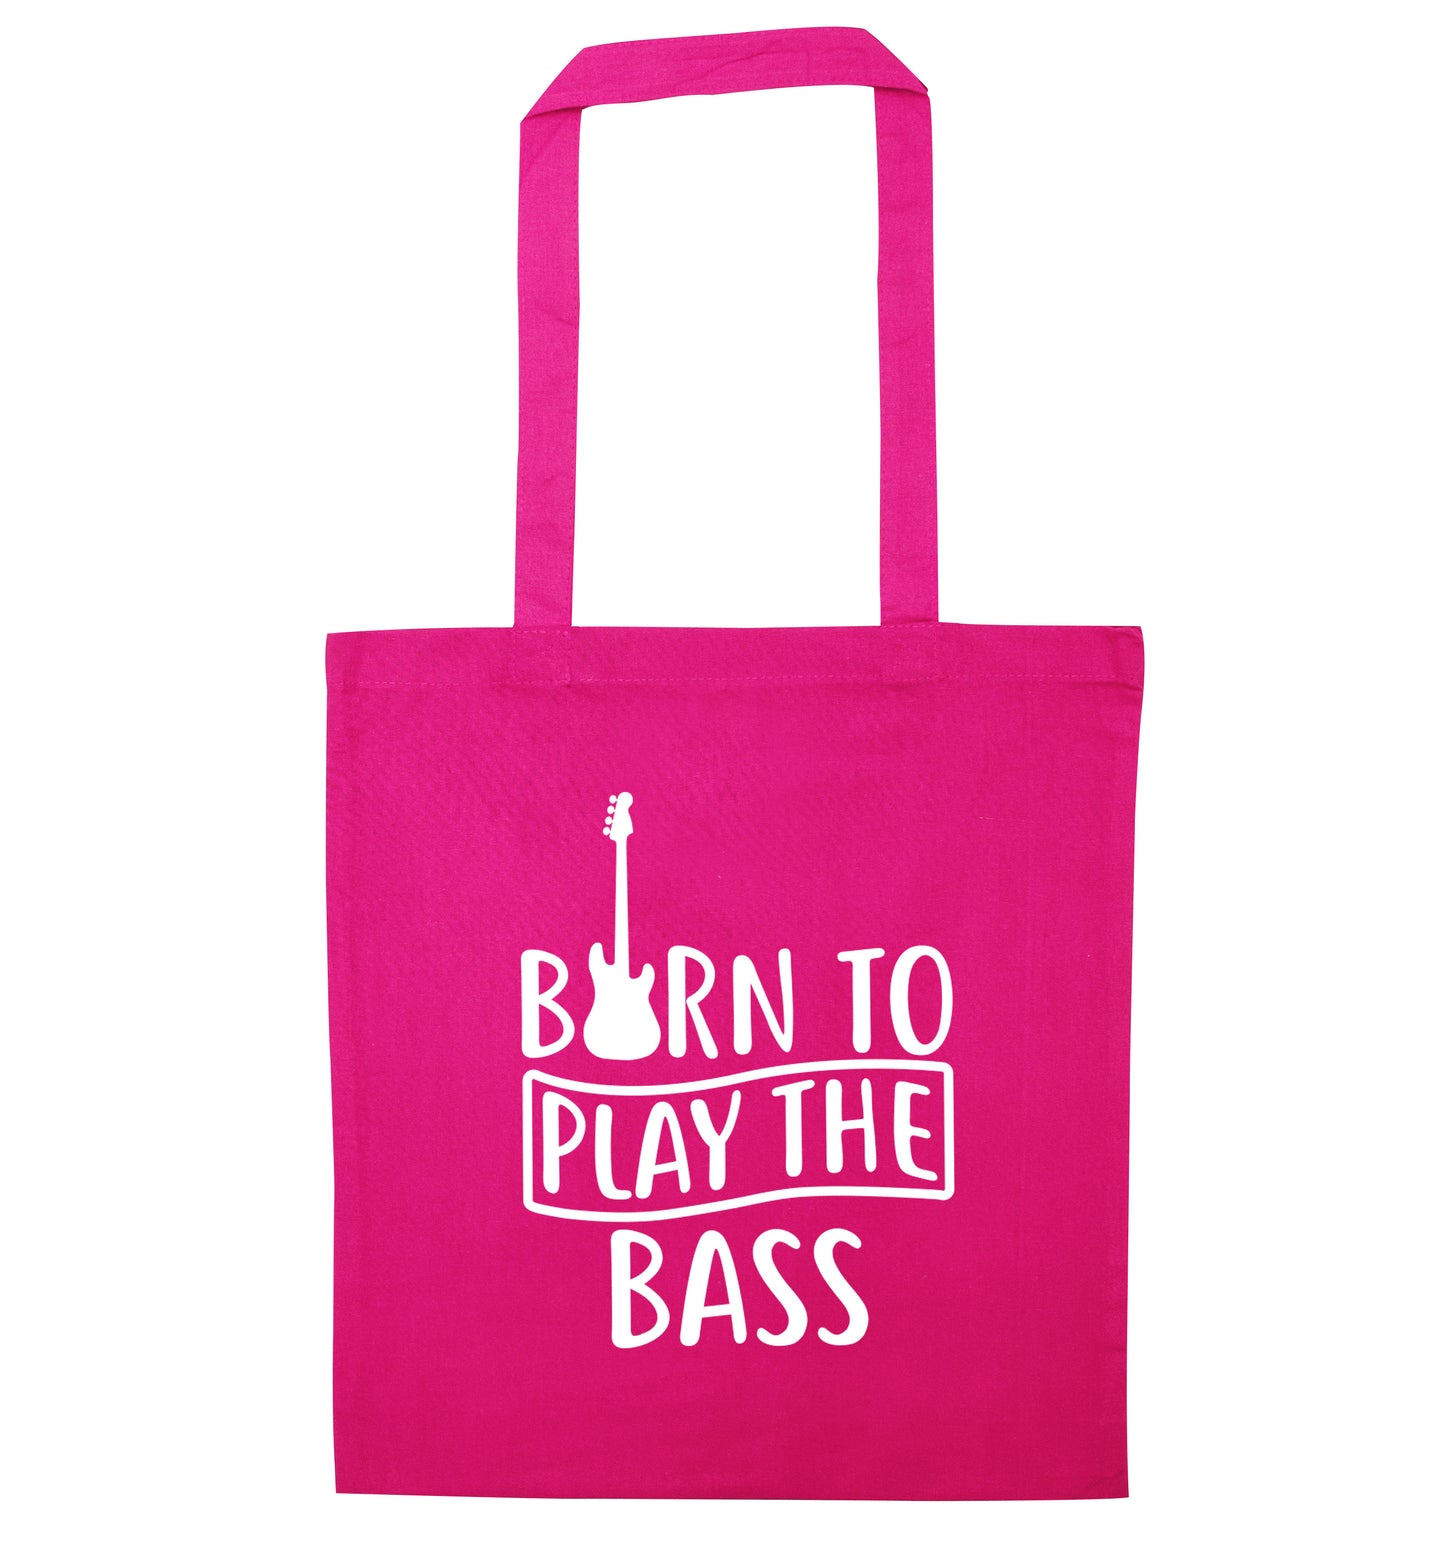 Born to play the bass pink tote bag